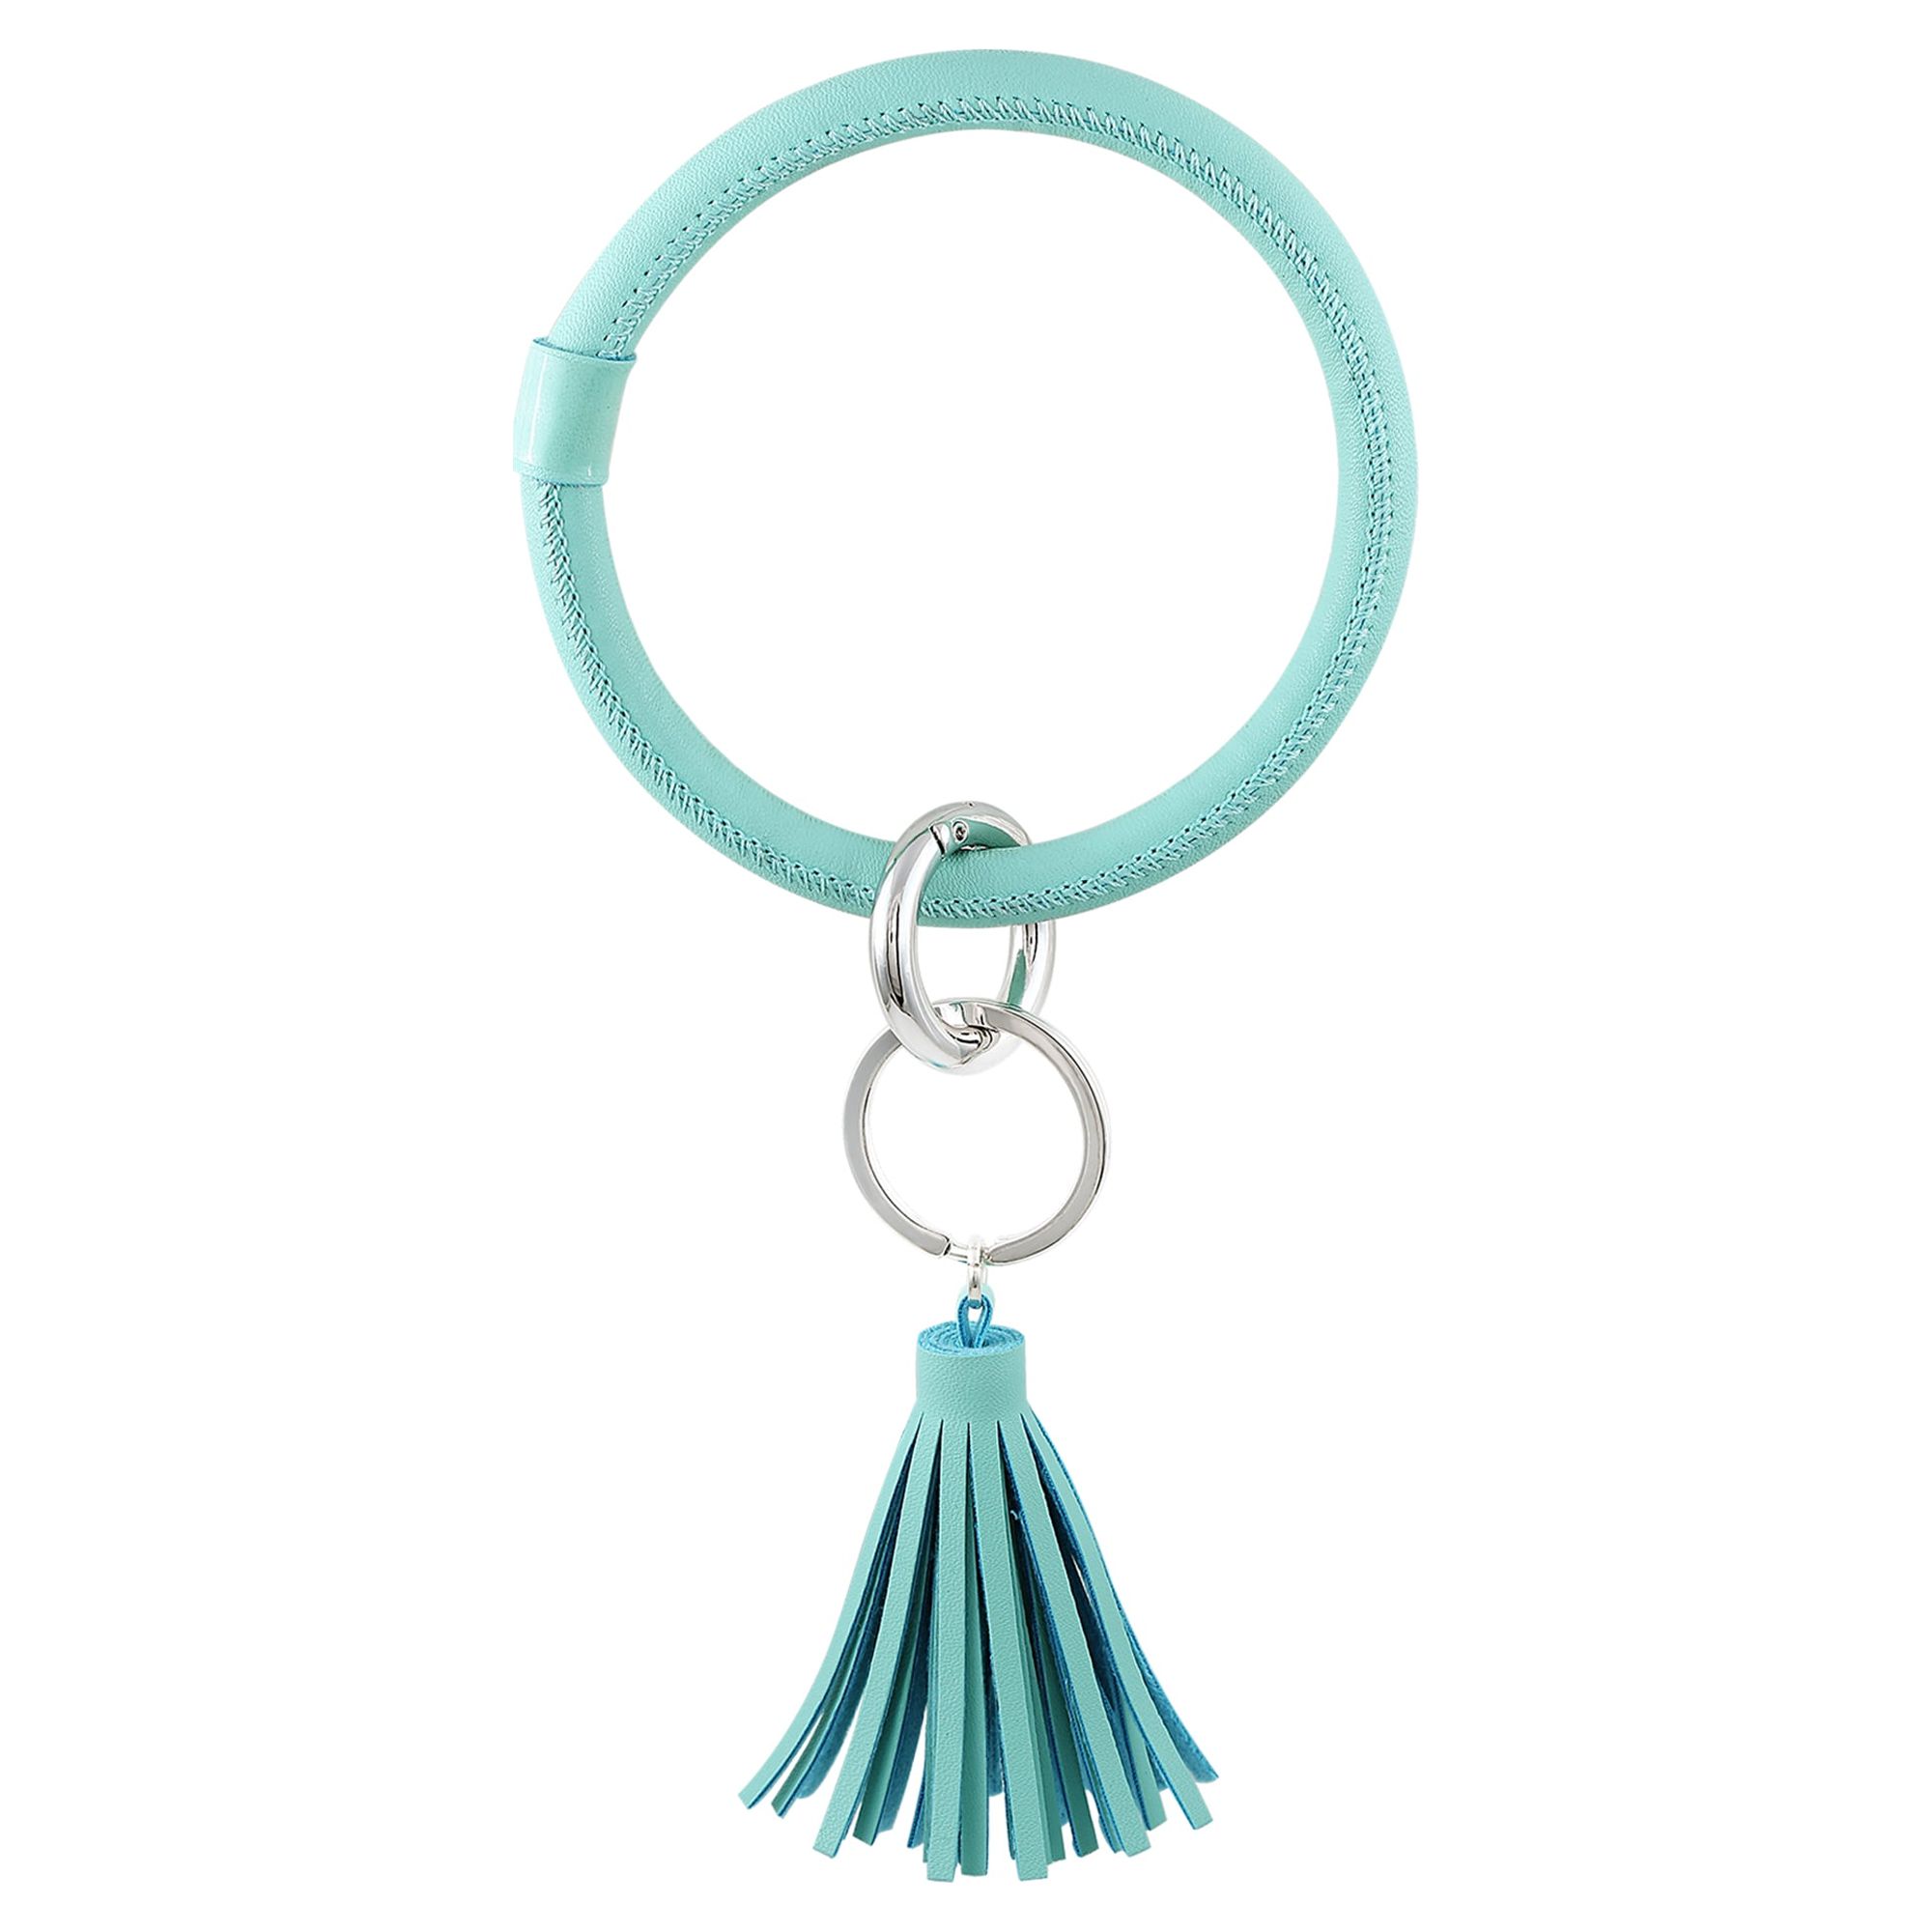 Sensible Solutions Women's Turquoise Faux Leather Tassel Bangle Key Chain.  